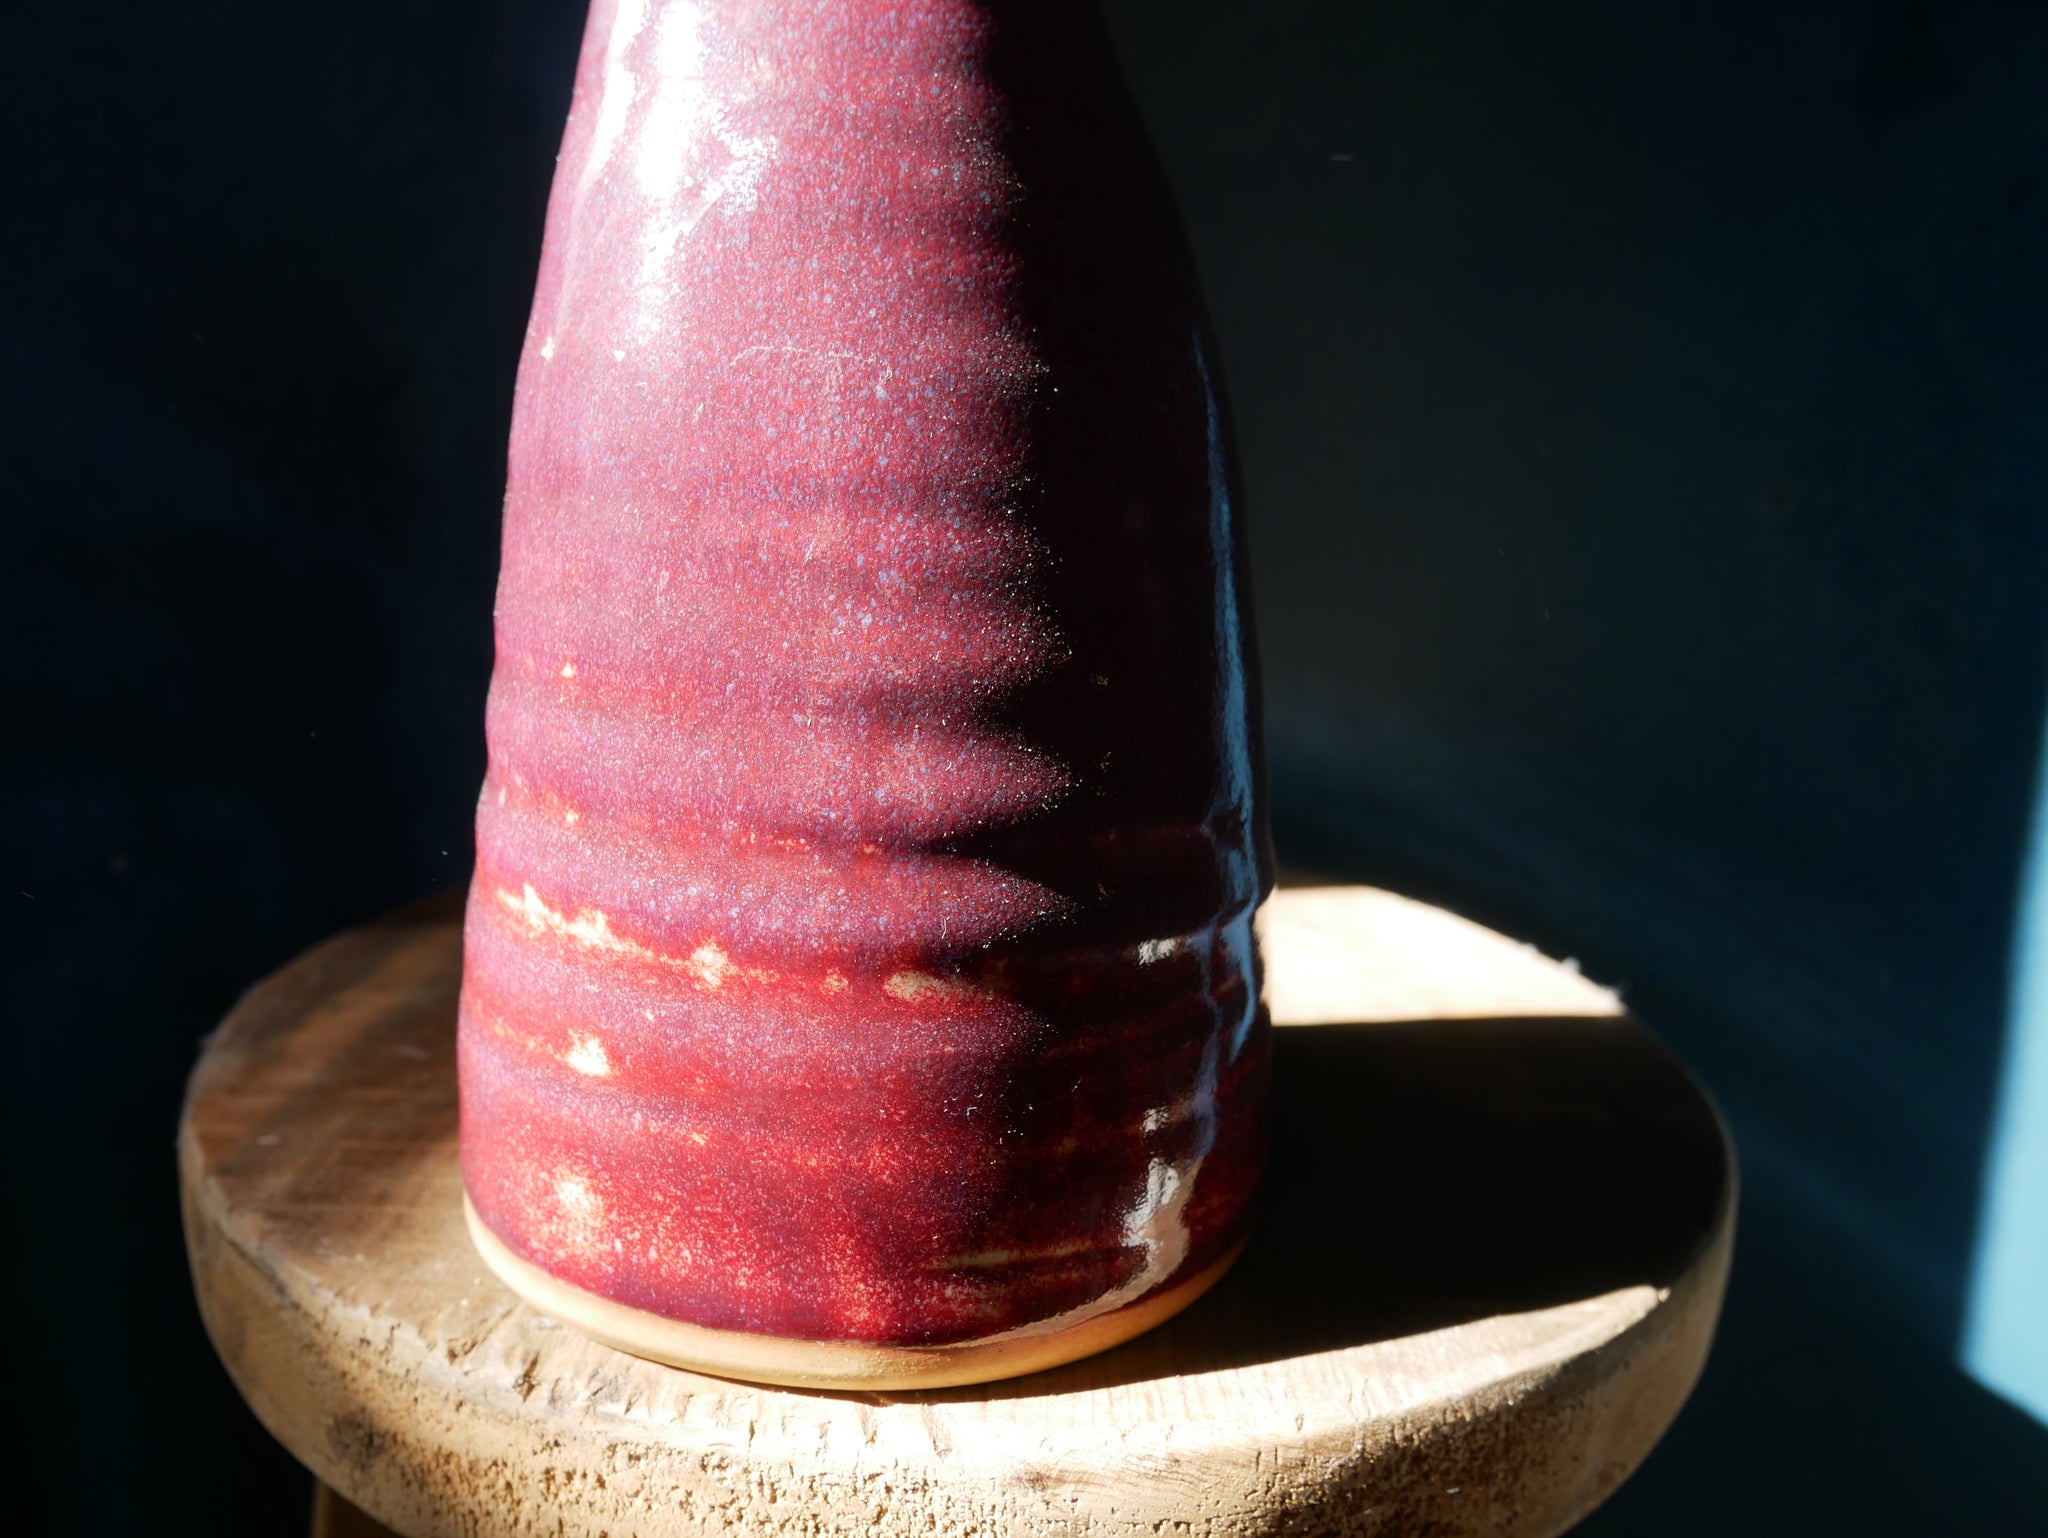 Copper Red Plum Vases - II - Two Styles